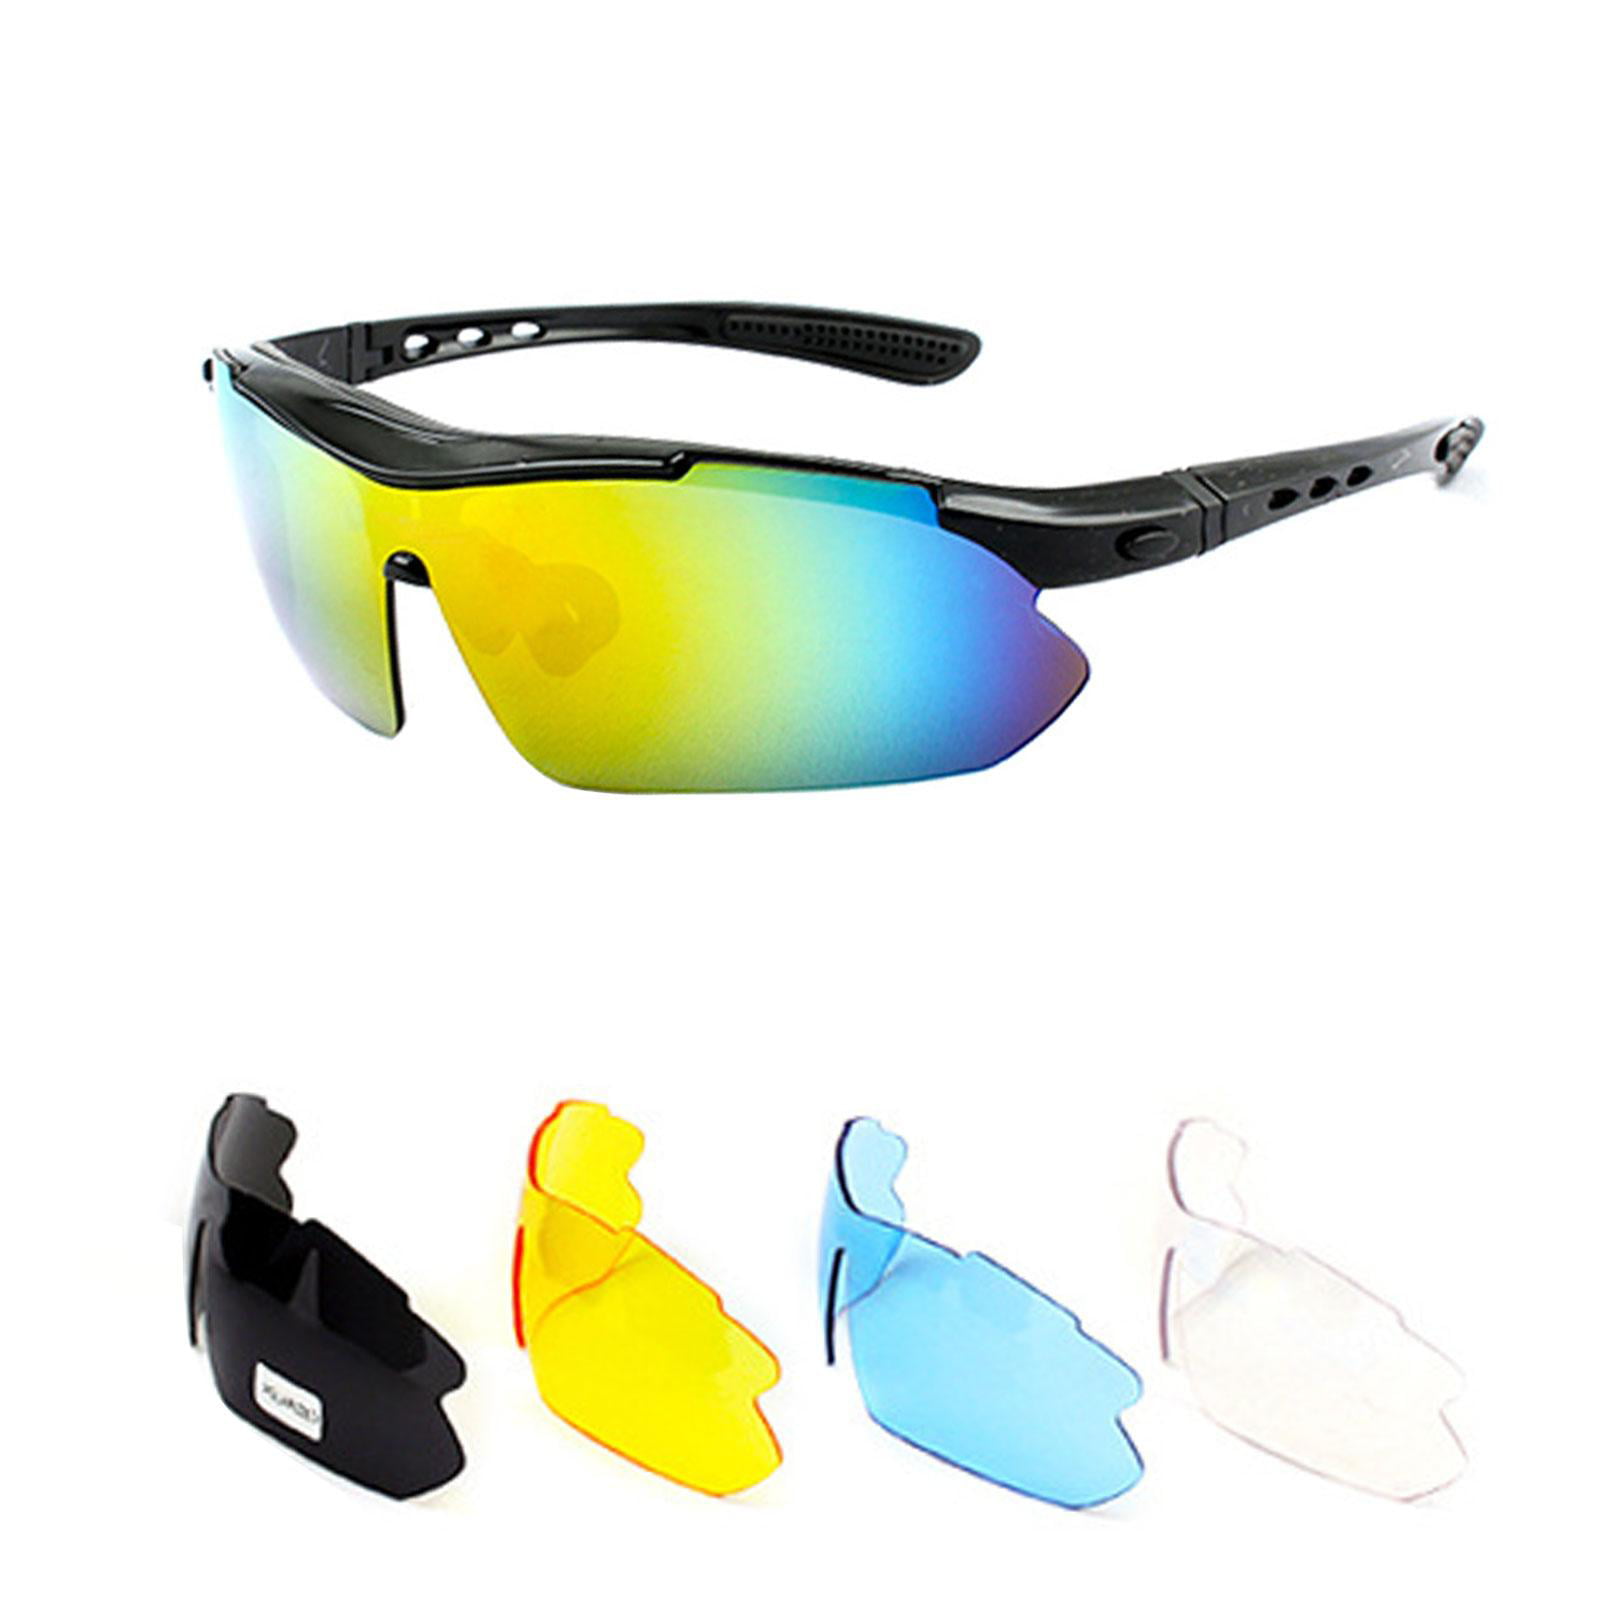 Polarized sports sunglasses with 5 lenses FAST SHIPPING! Seller U.S 